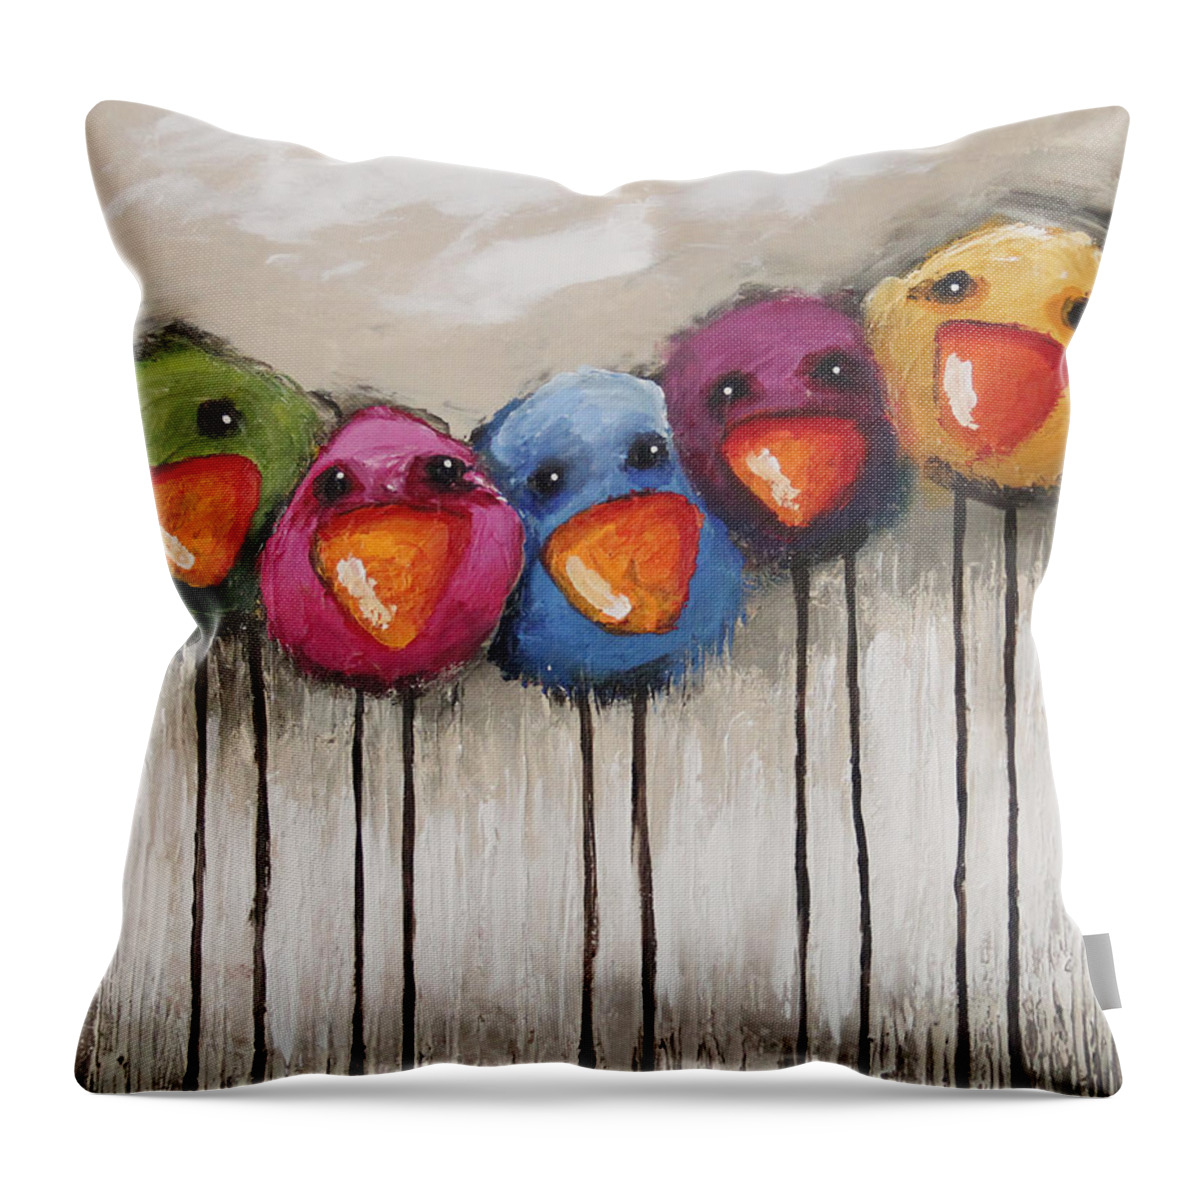 Bird Throw Pillow featuring the painting The Birds by Lucia Stewart